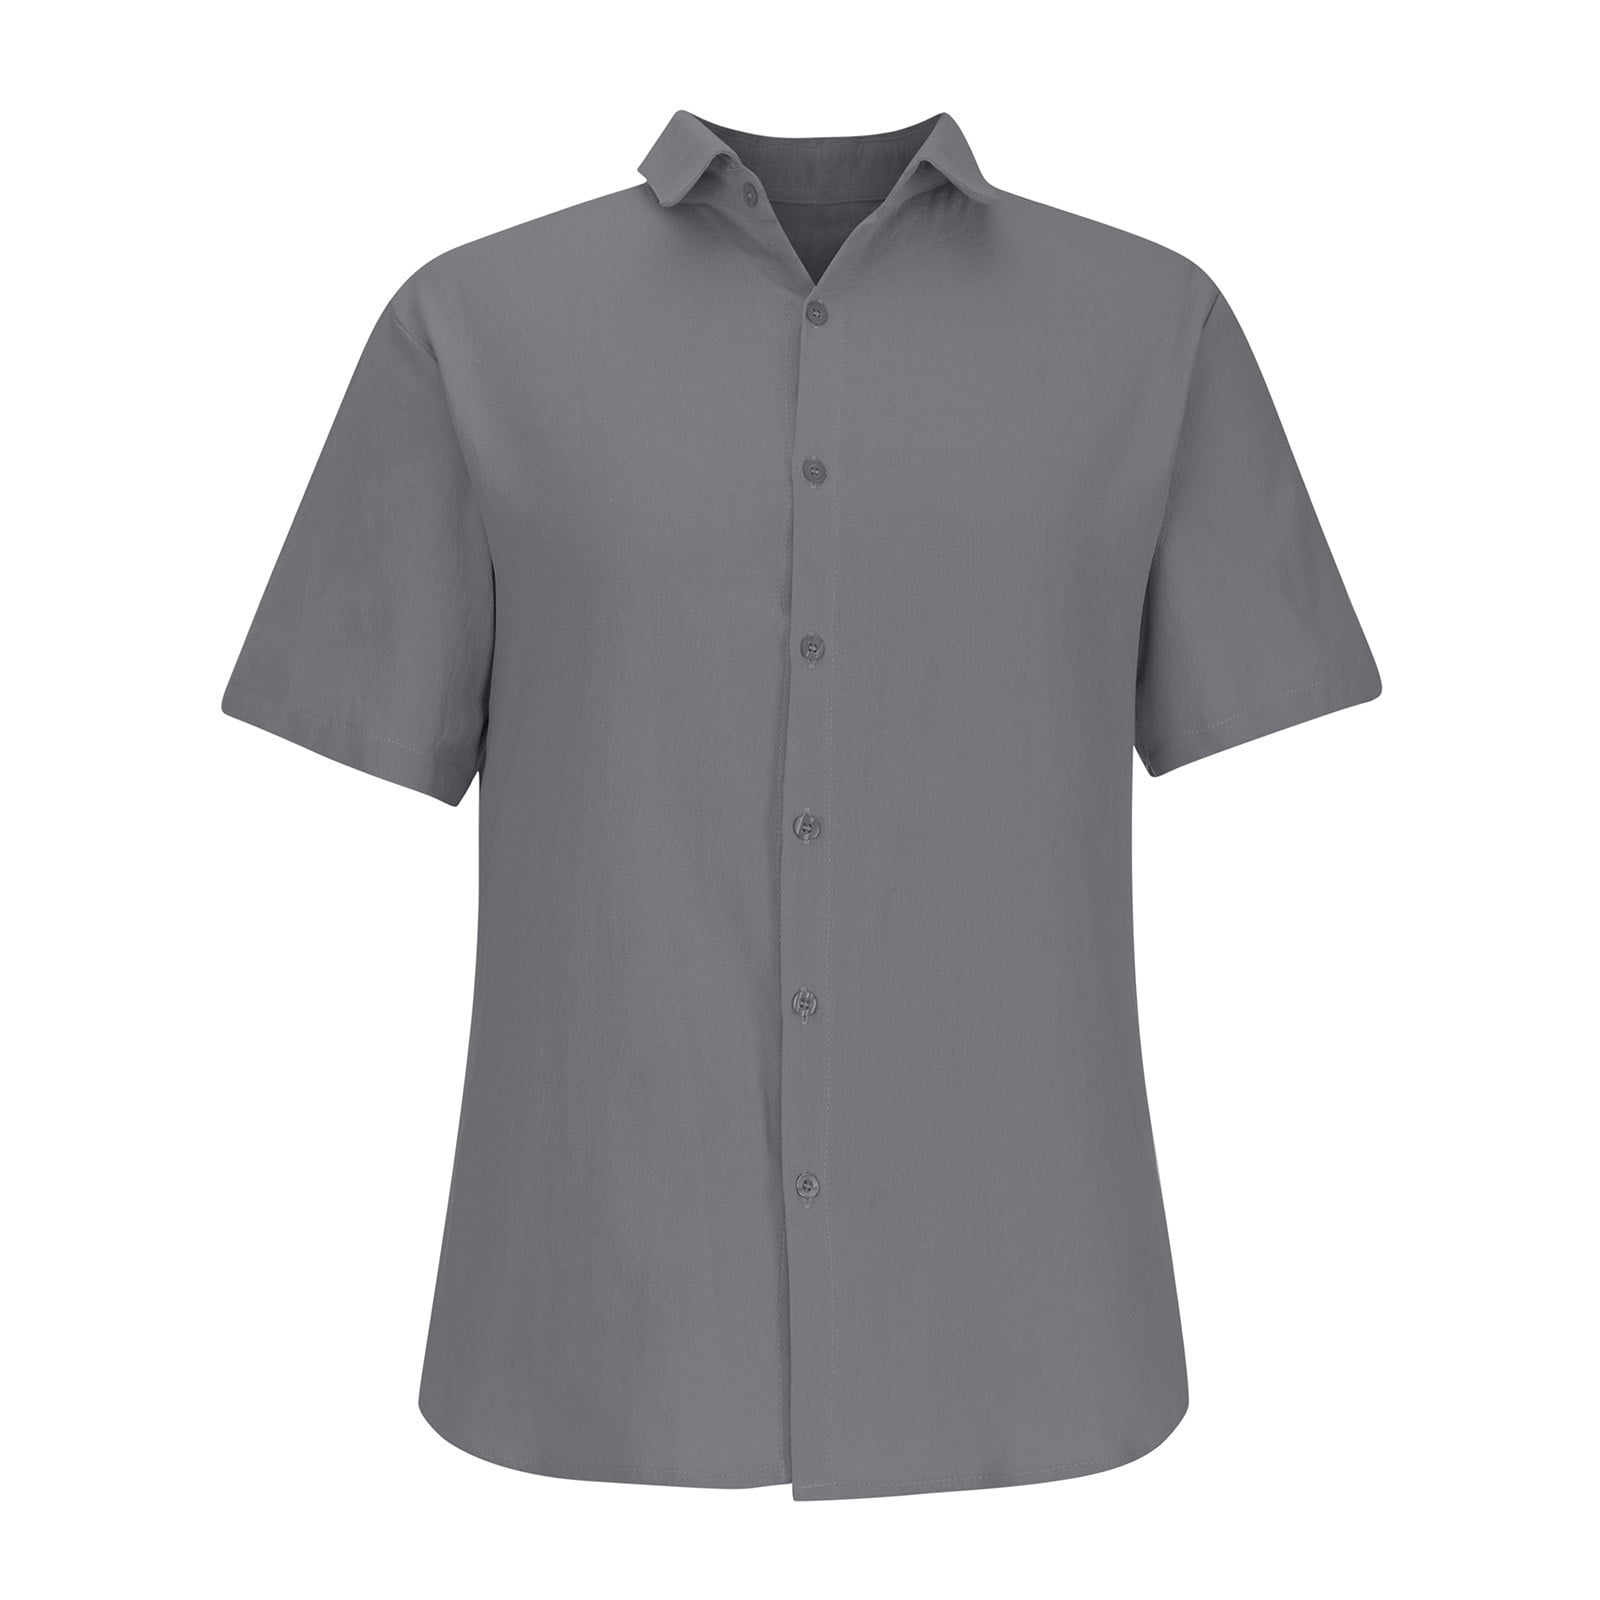 ZCFZJW Plus Size Summer Cotton Linen Shirts for Men Big and Tall Regular  Fit Casual Lightweight Solid Color Short Sleeve Button Down T-Shirts Tops  Dark Gray XXL 